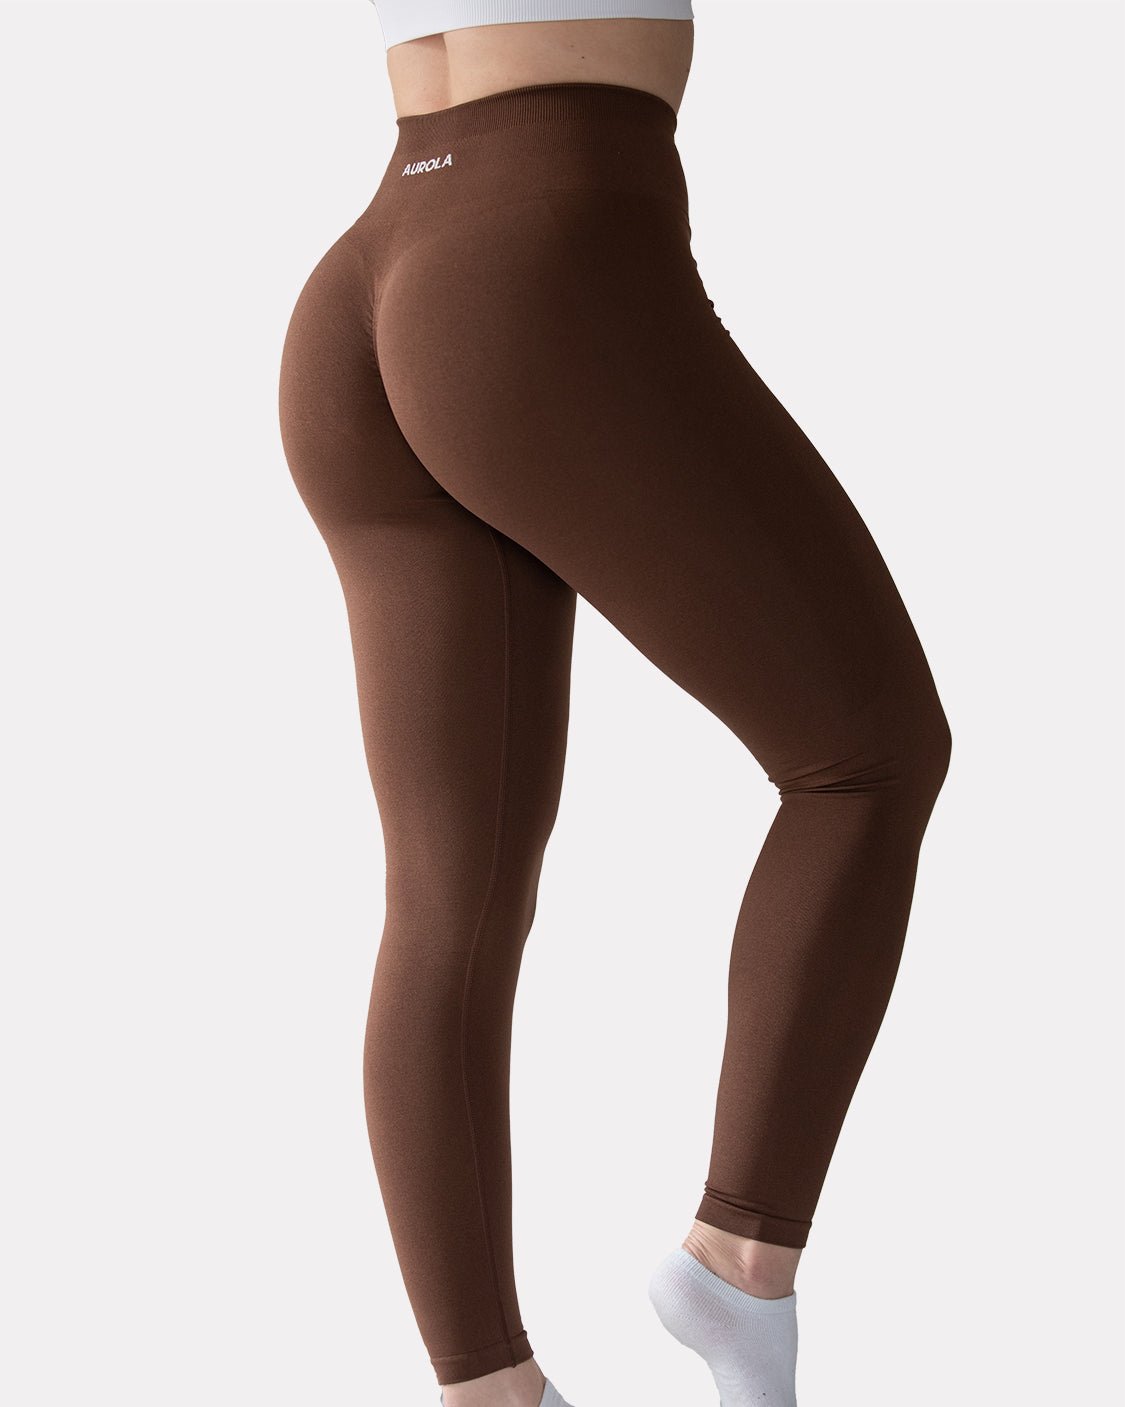 AUROLA Dream Collection Workout Leggings for Women Small, Brown